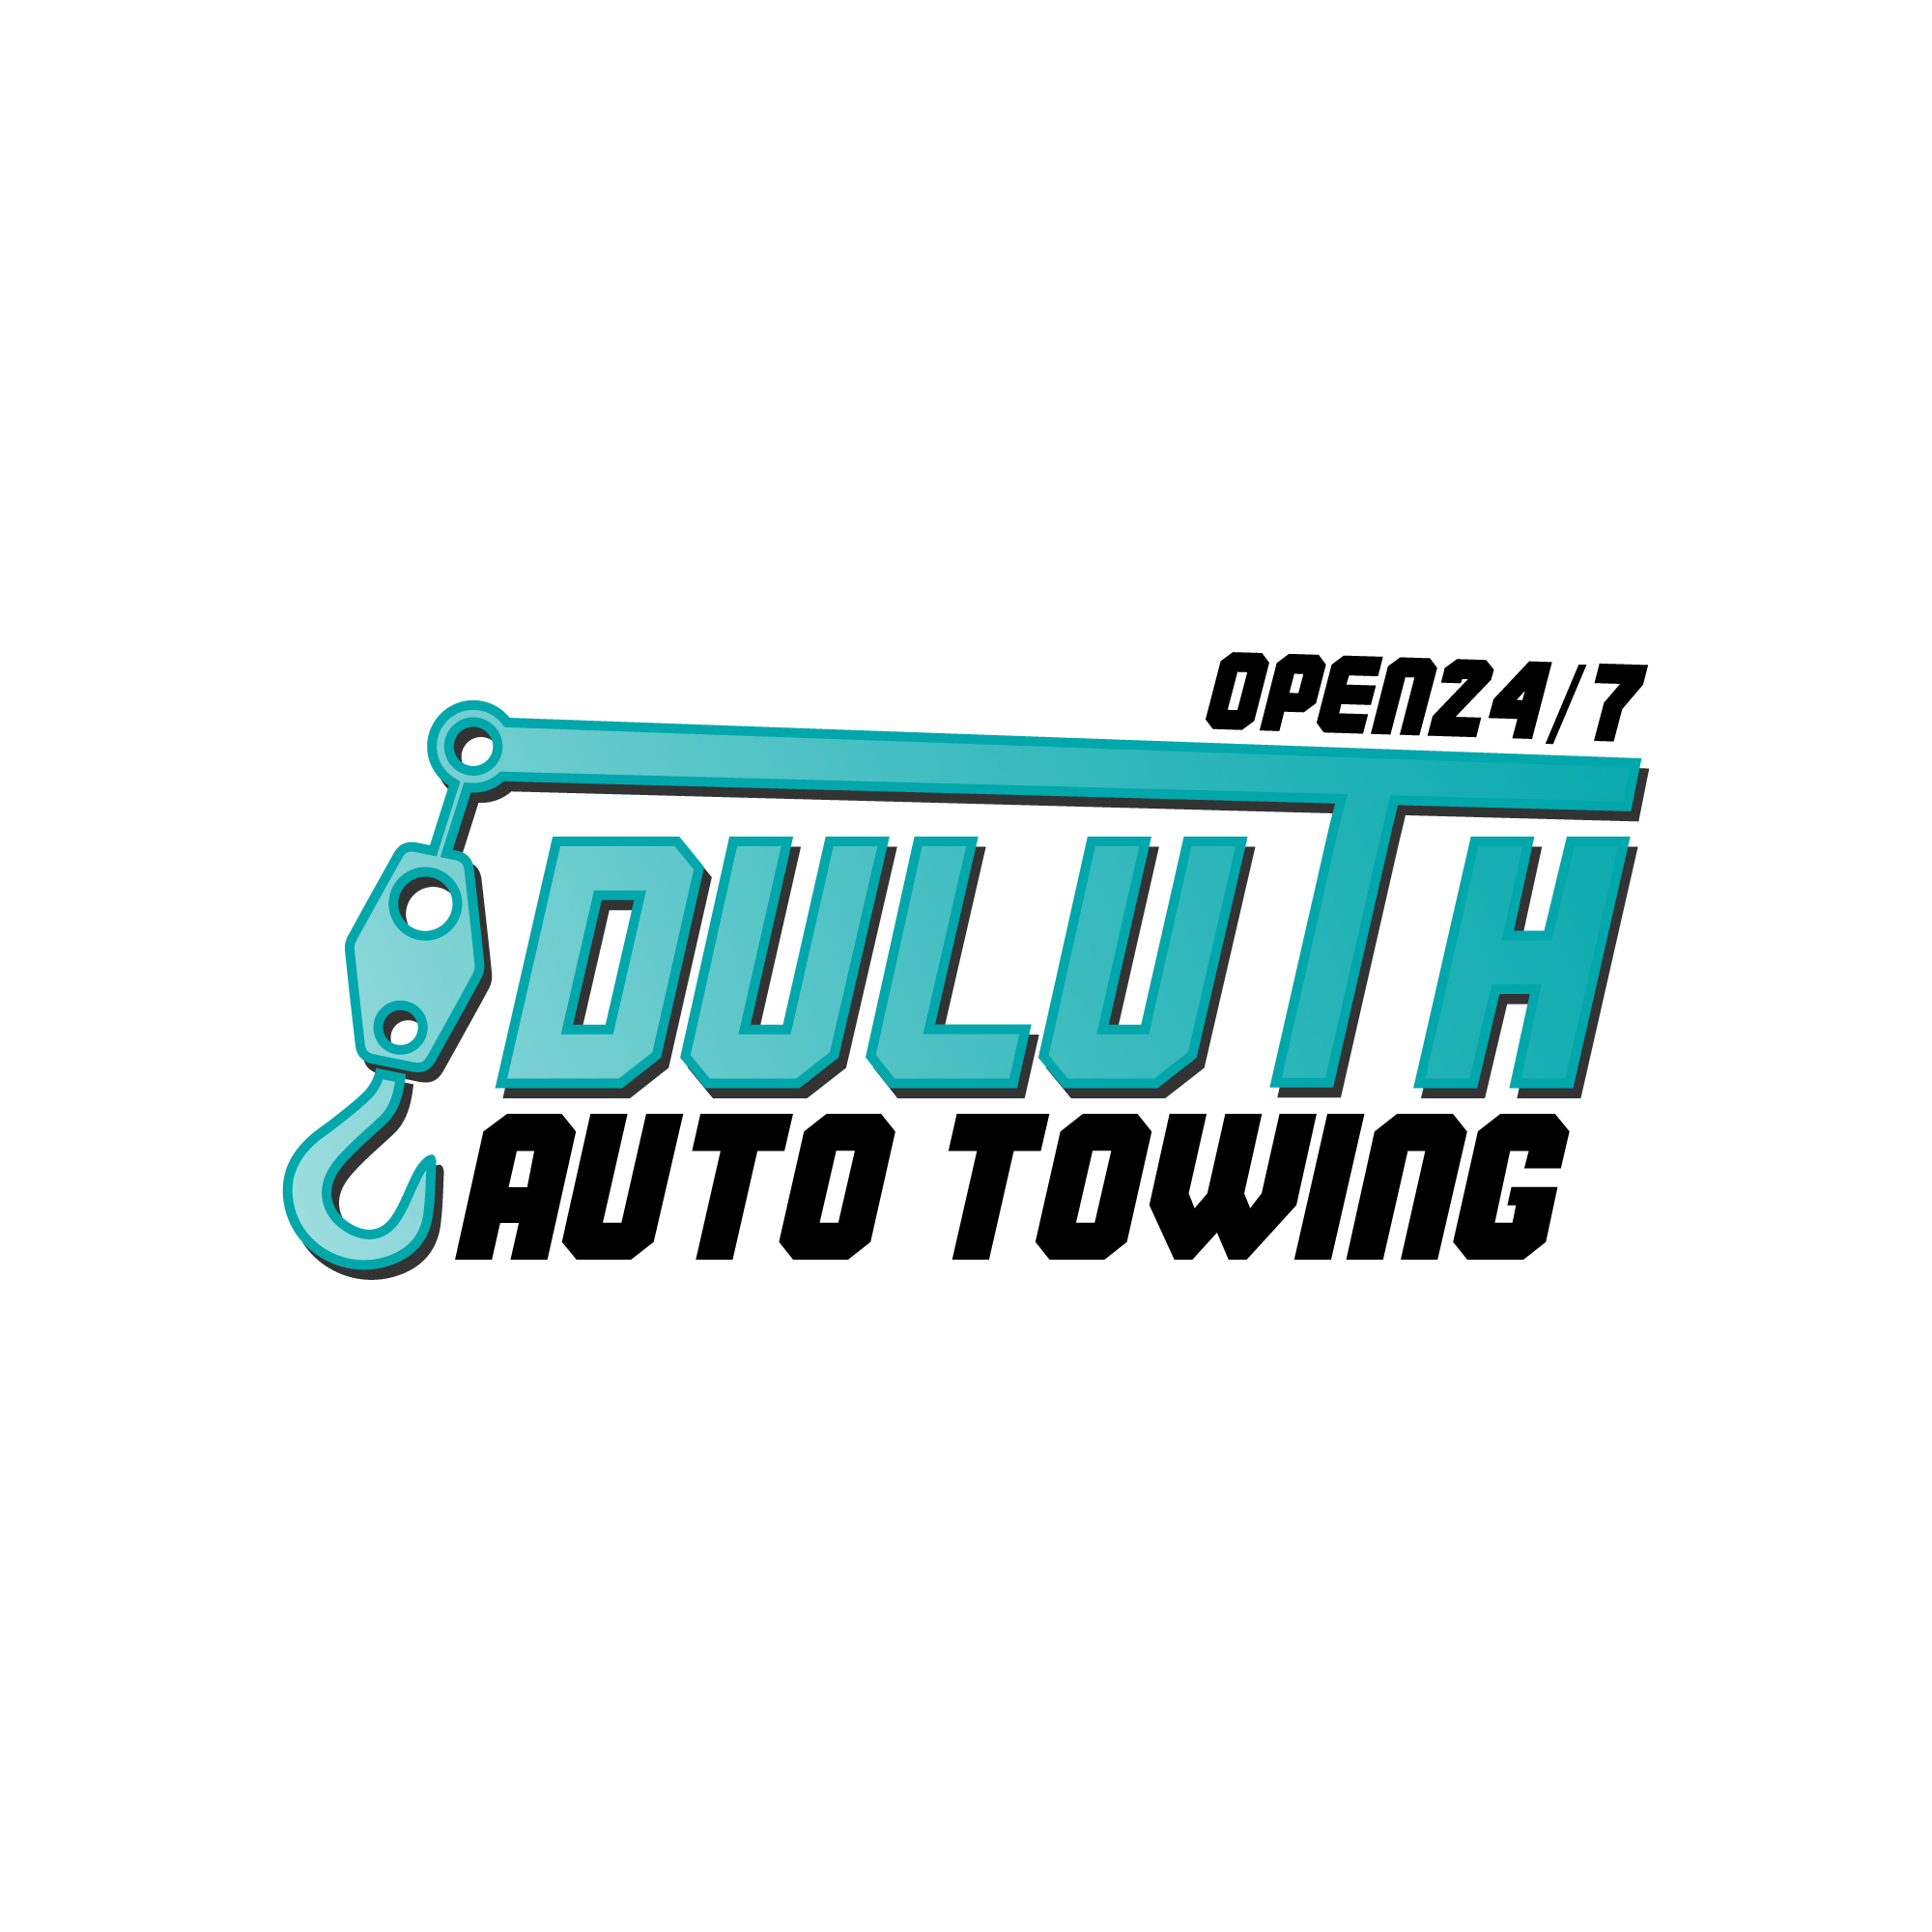 Duluth Auto Towing Announces Major Growth with The Launch of New Website and Expansion into New Areas 